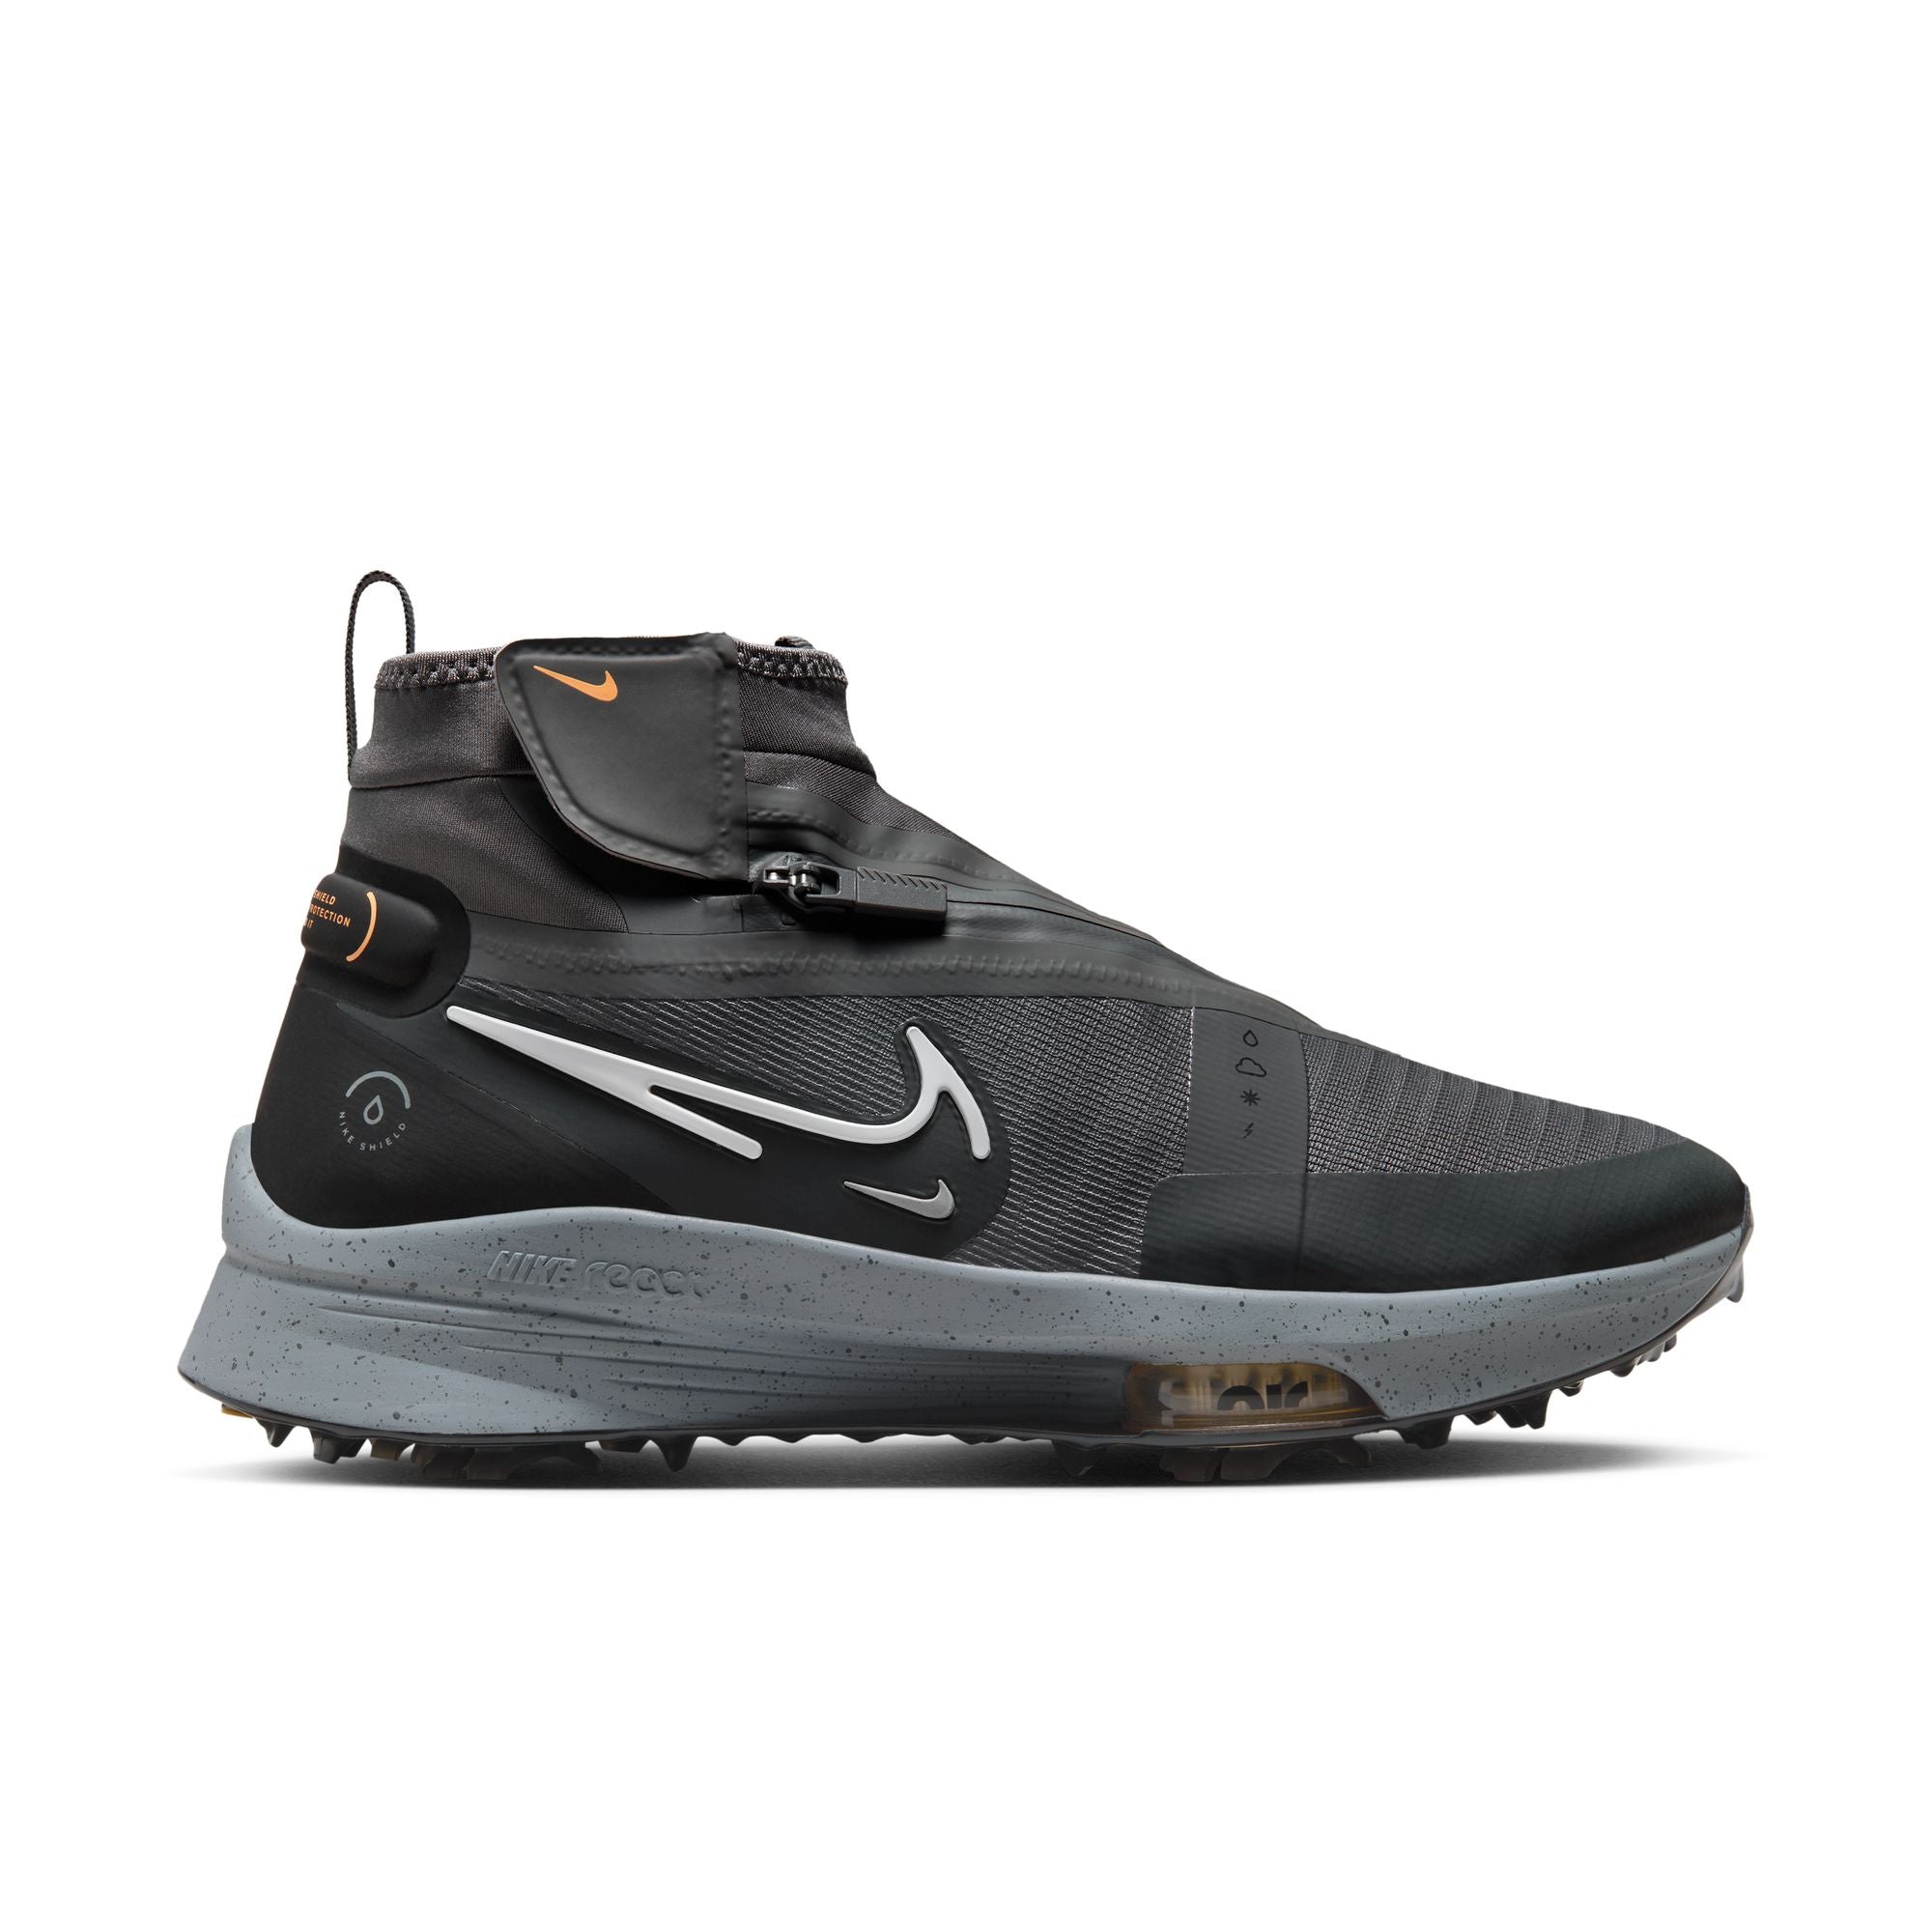 Nike Air Zoom Infinity Tour NEXT% Shield Men's Weatherized Golf Shoes